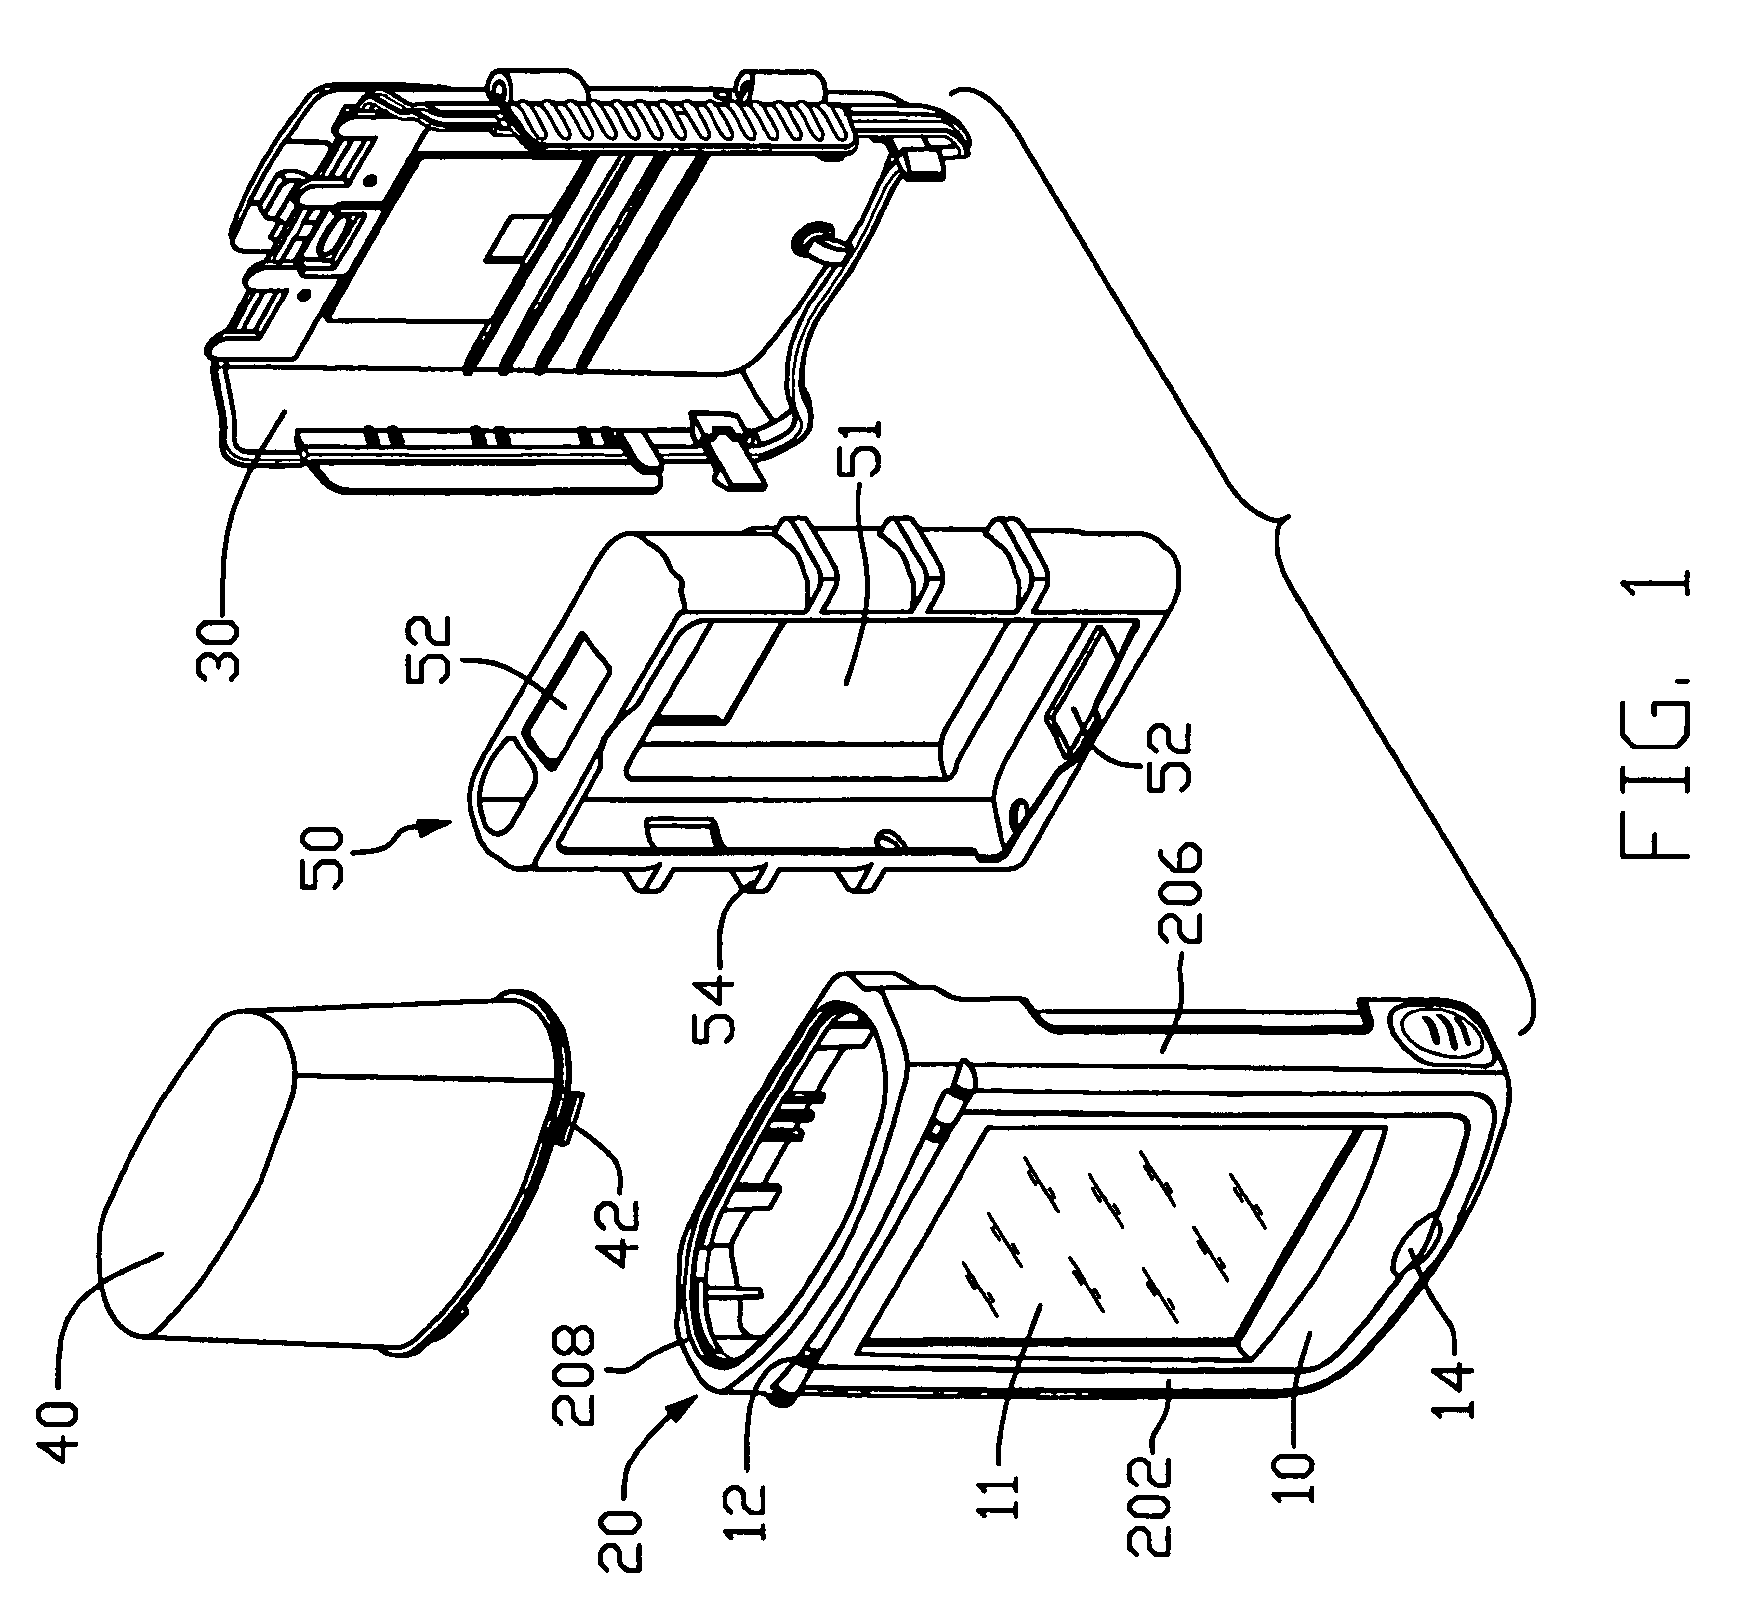 PDA carrying device